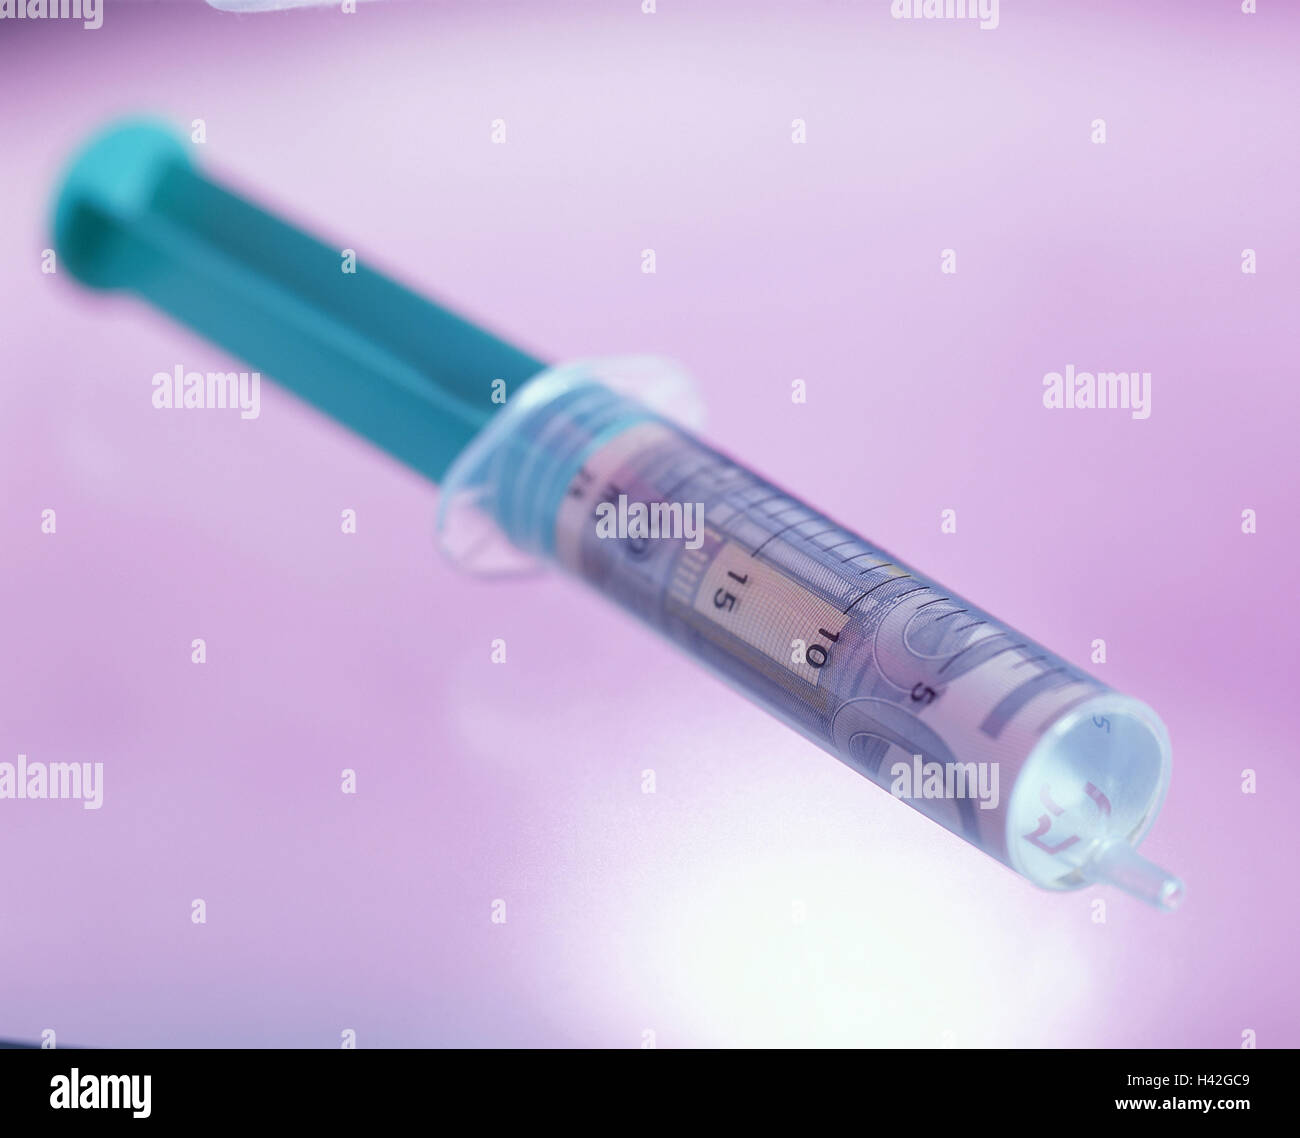 Syringe, banknote, icon, 'injection capital' conception, disposable syringe, bank note, euro banknote, euro, compulsory medical insurance, insurance, legally, health reform, compulsory insurance, additional payment, expenses, money, fees, fee, medicine, d Stock Photo